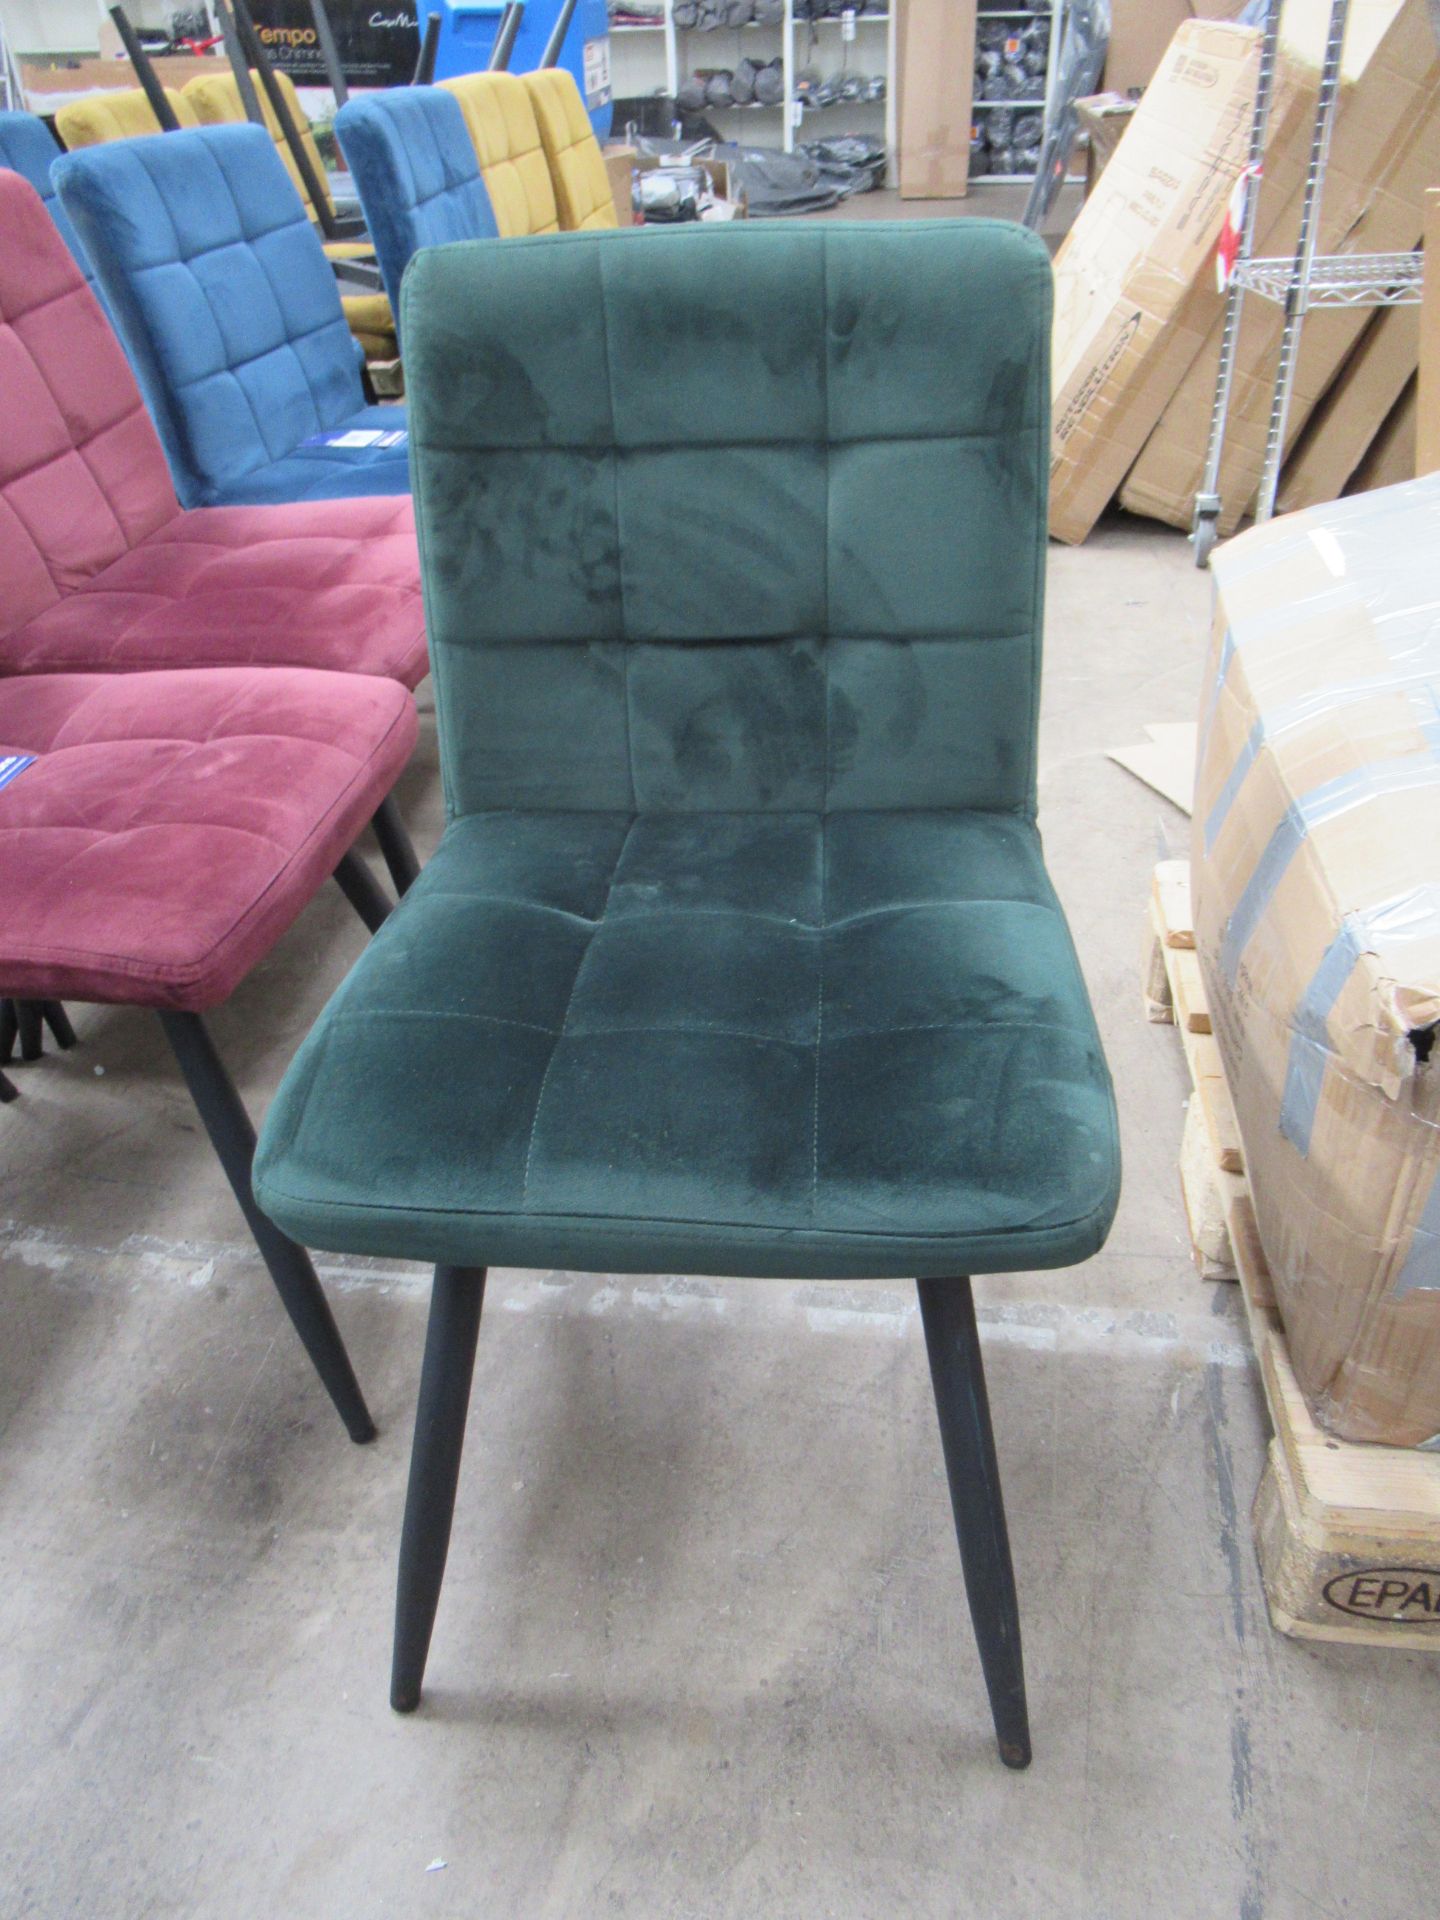 6x Green Suede Effect Chairs - Image 2 of 2